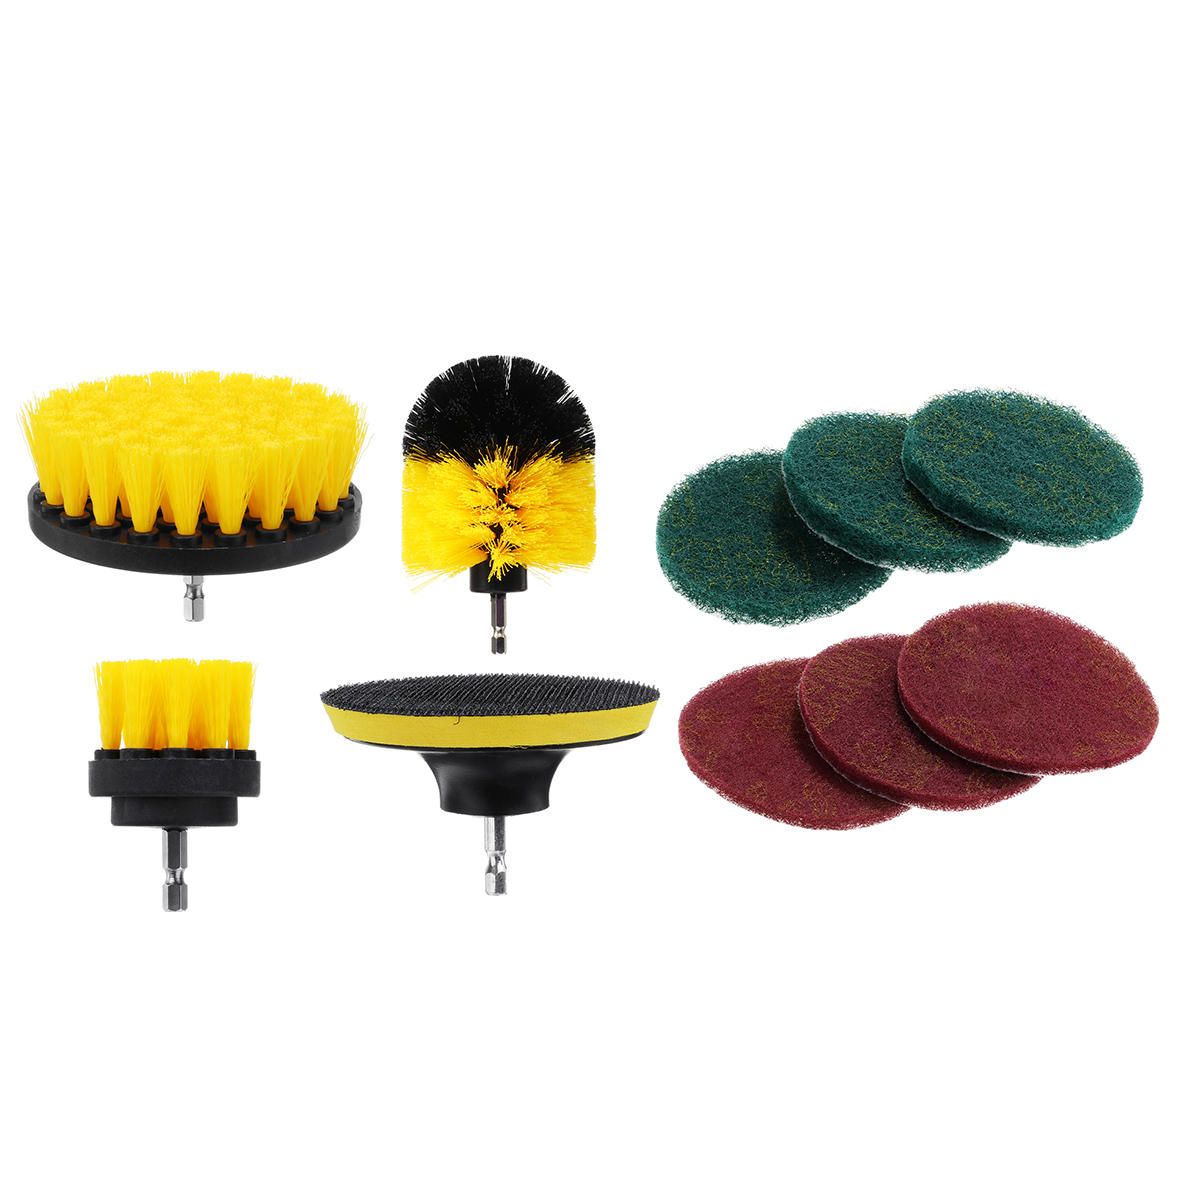 

Power Scrubber Drill Brush Set Cleaner Spin Tub Shower Tile Grout Wall 4 Cleaning Brushes